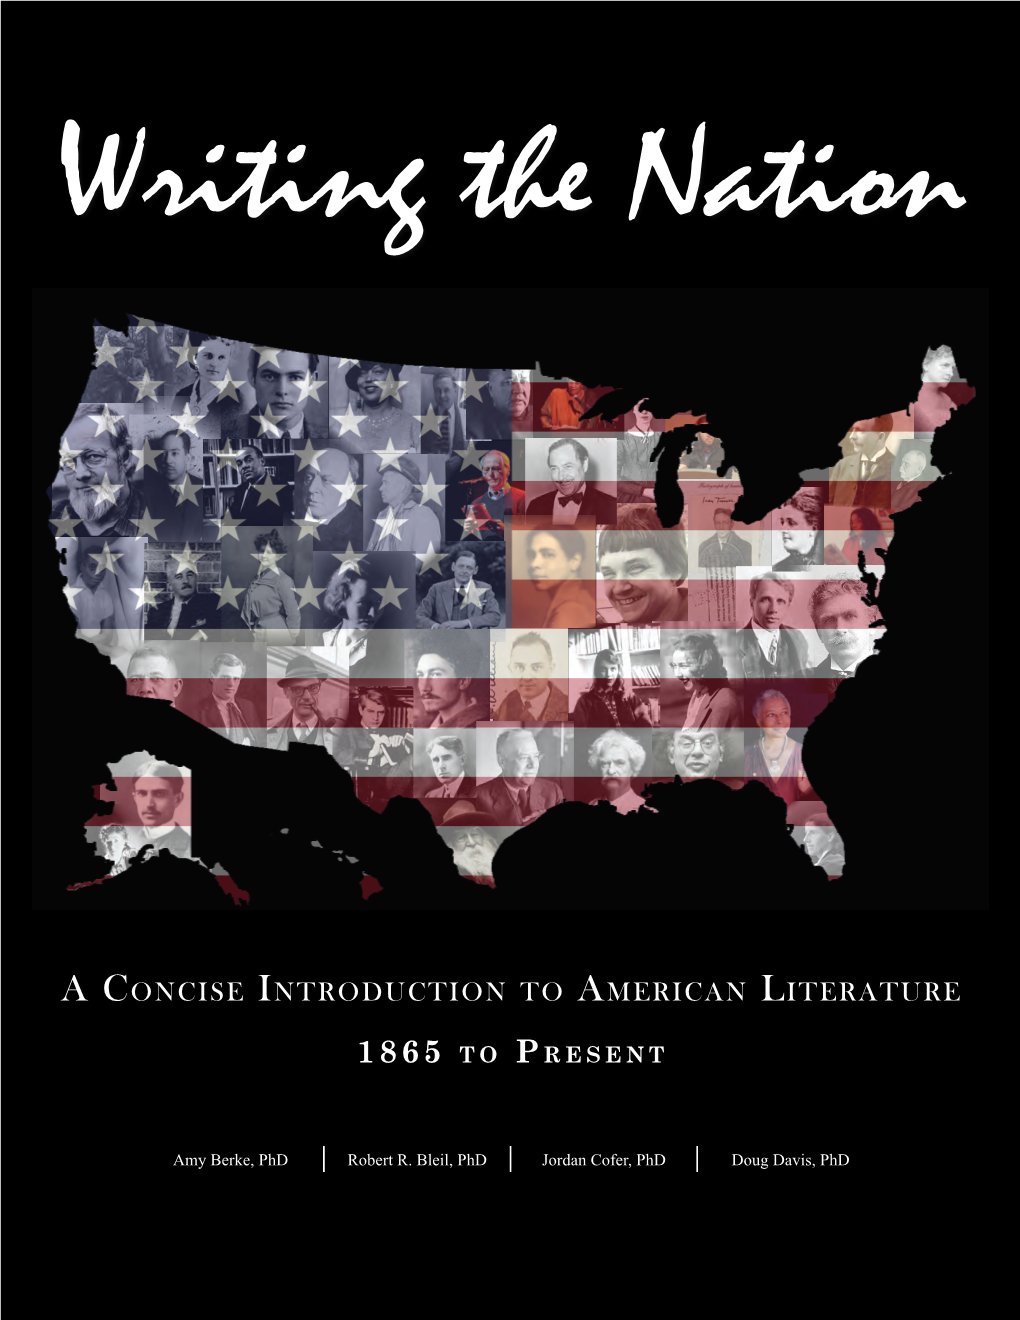 A Concise Introduction to American Literature